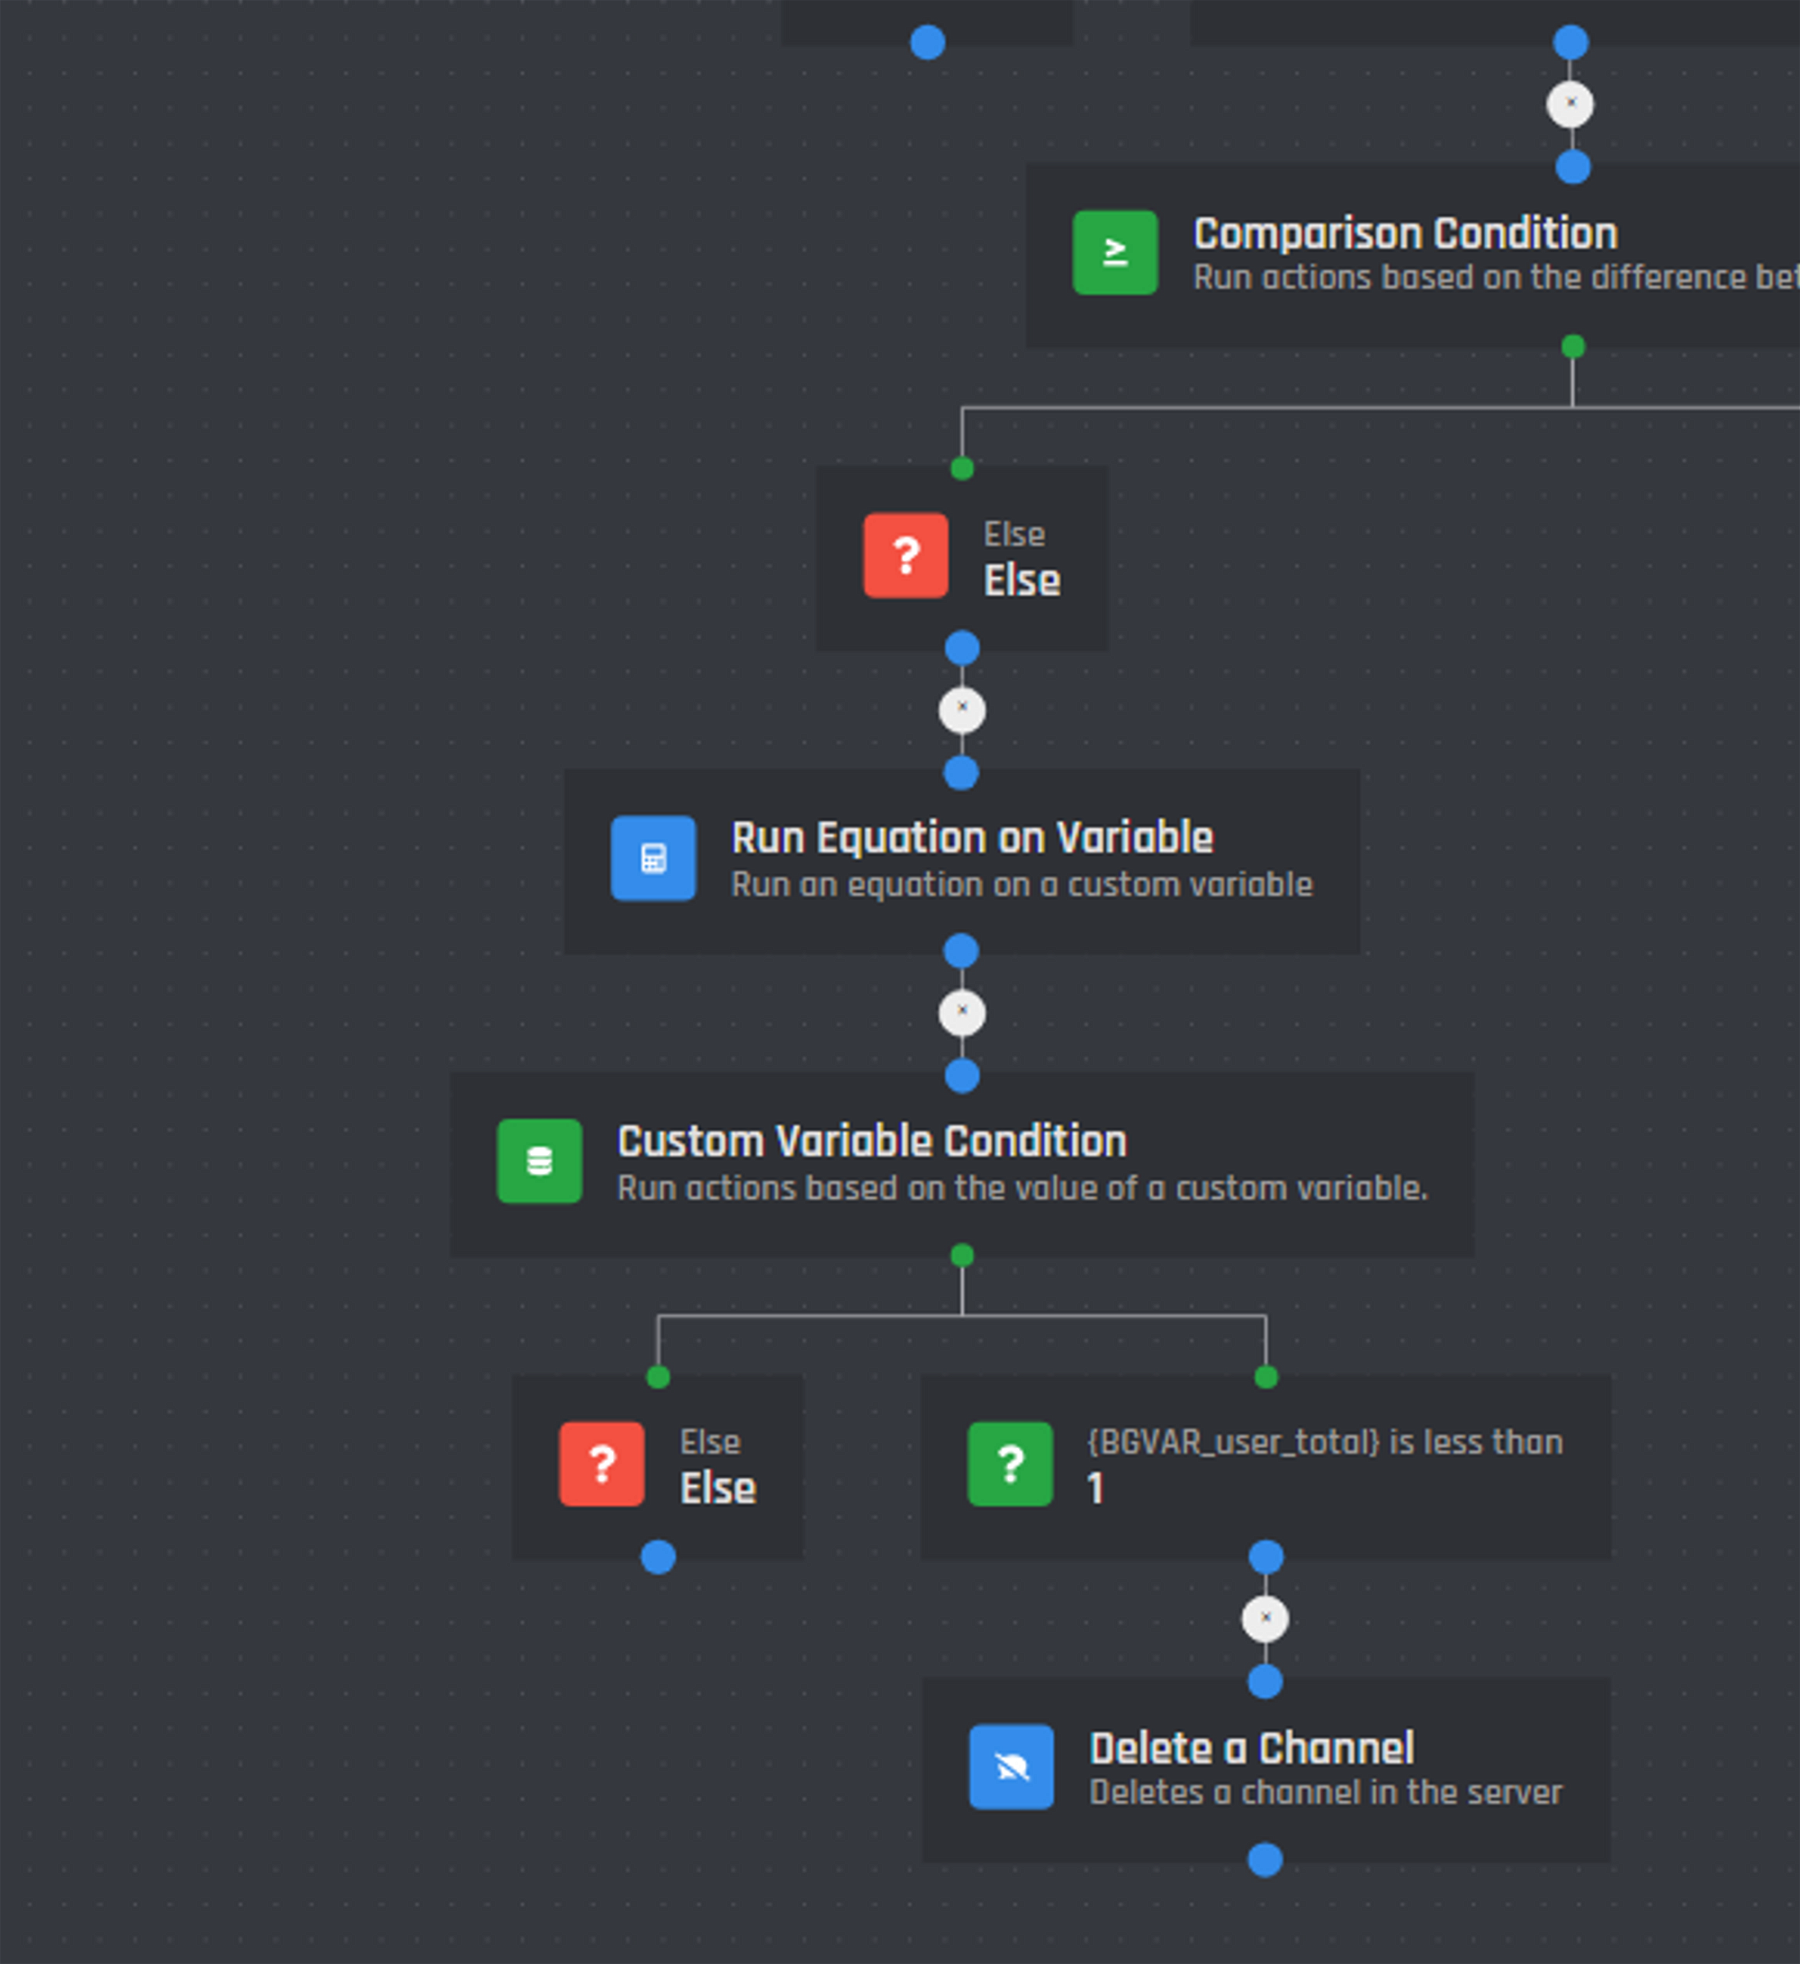 EmpyManager - Temporary Voice And Text Channels on Discord